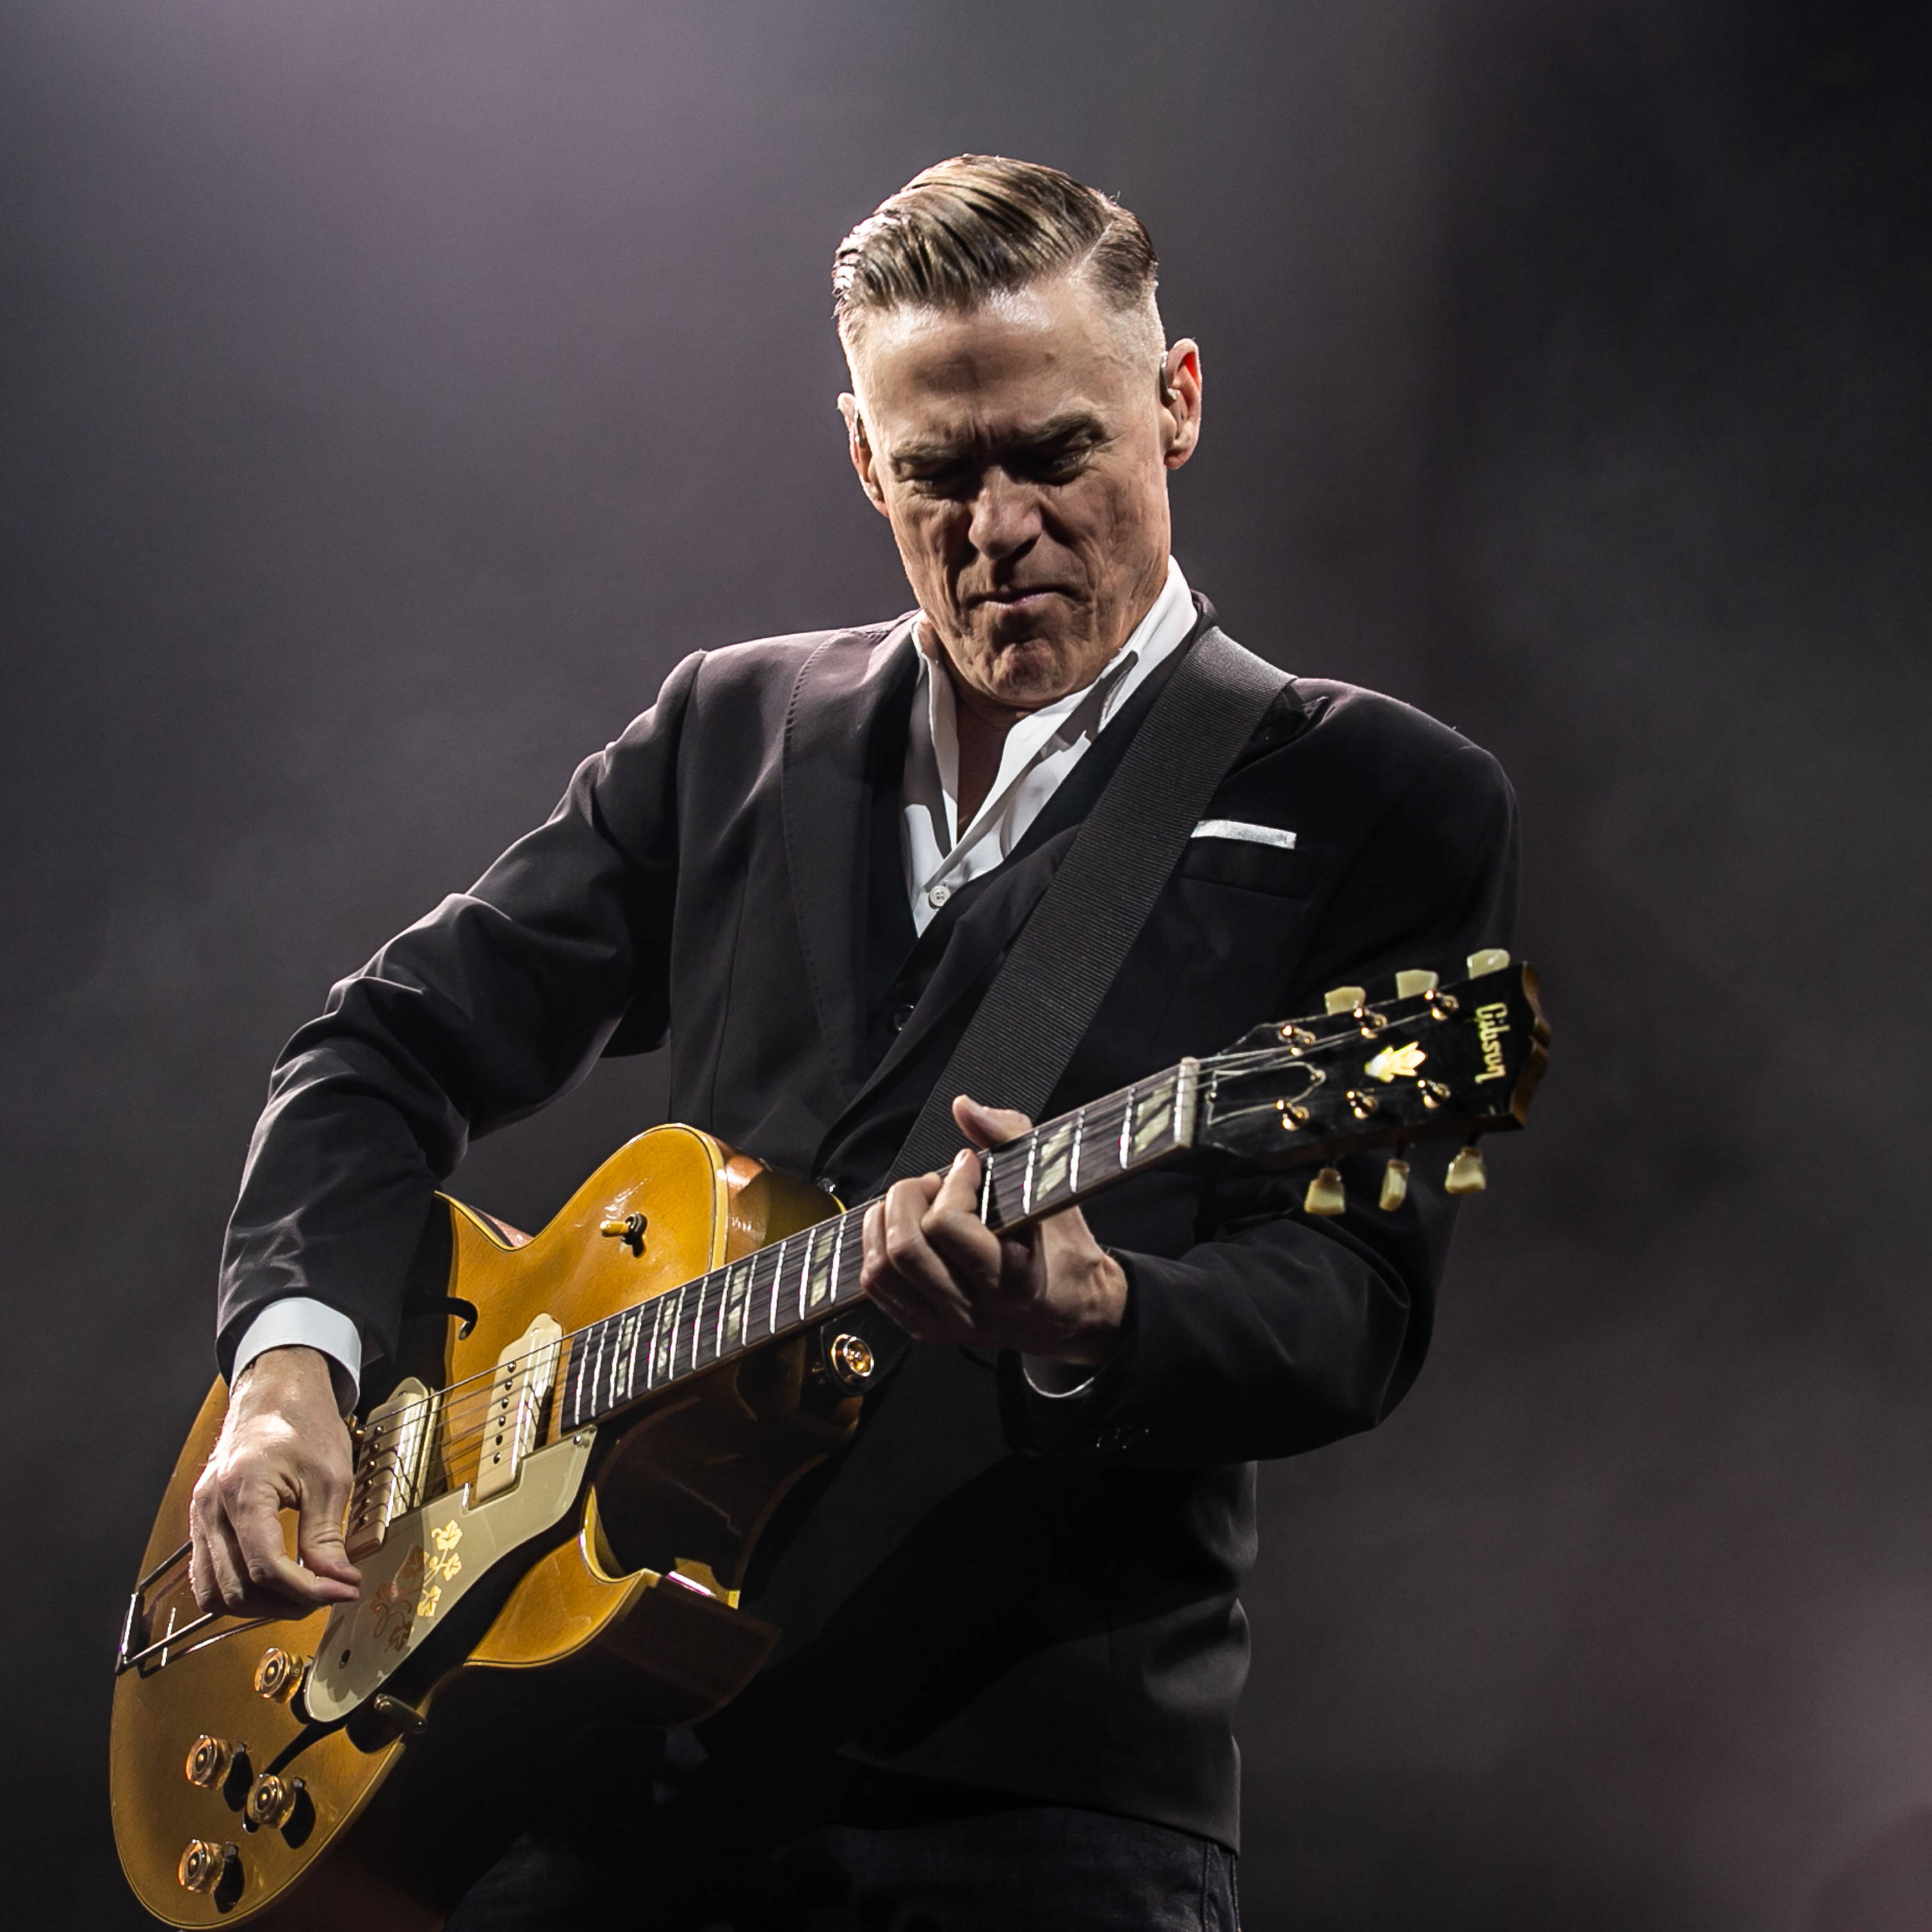 Bryan Adams facts: Singer's age, children, parents, photography and career revealed - Smooth